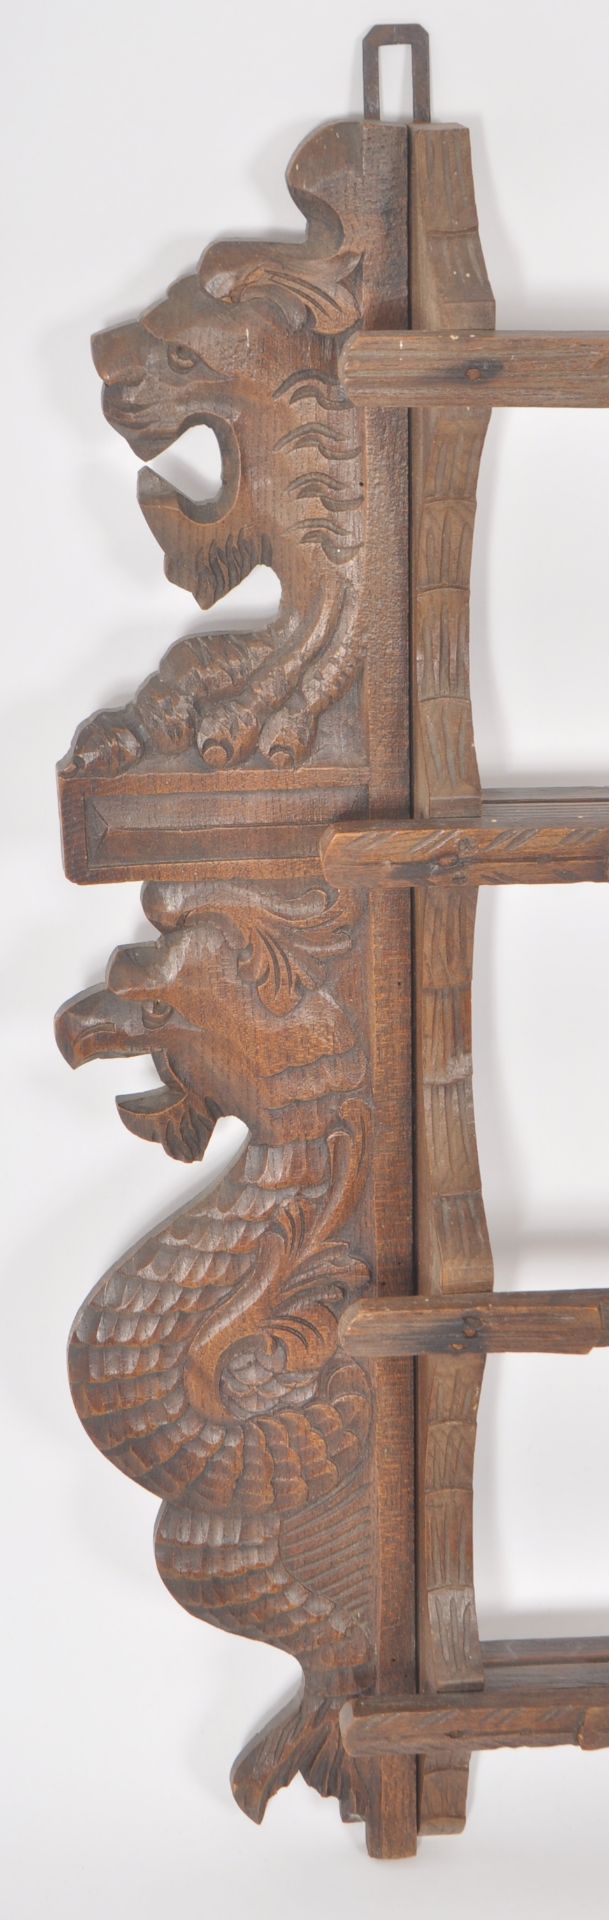 19TH CENTURY HEAVILY CARVED OAK LION HEADS WALL RACK - Image 2 of 4